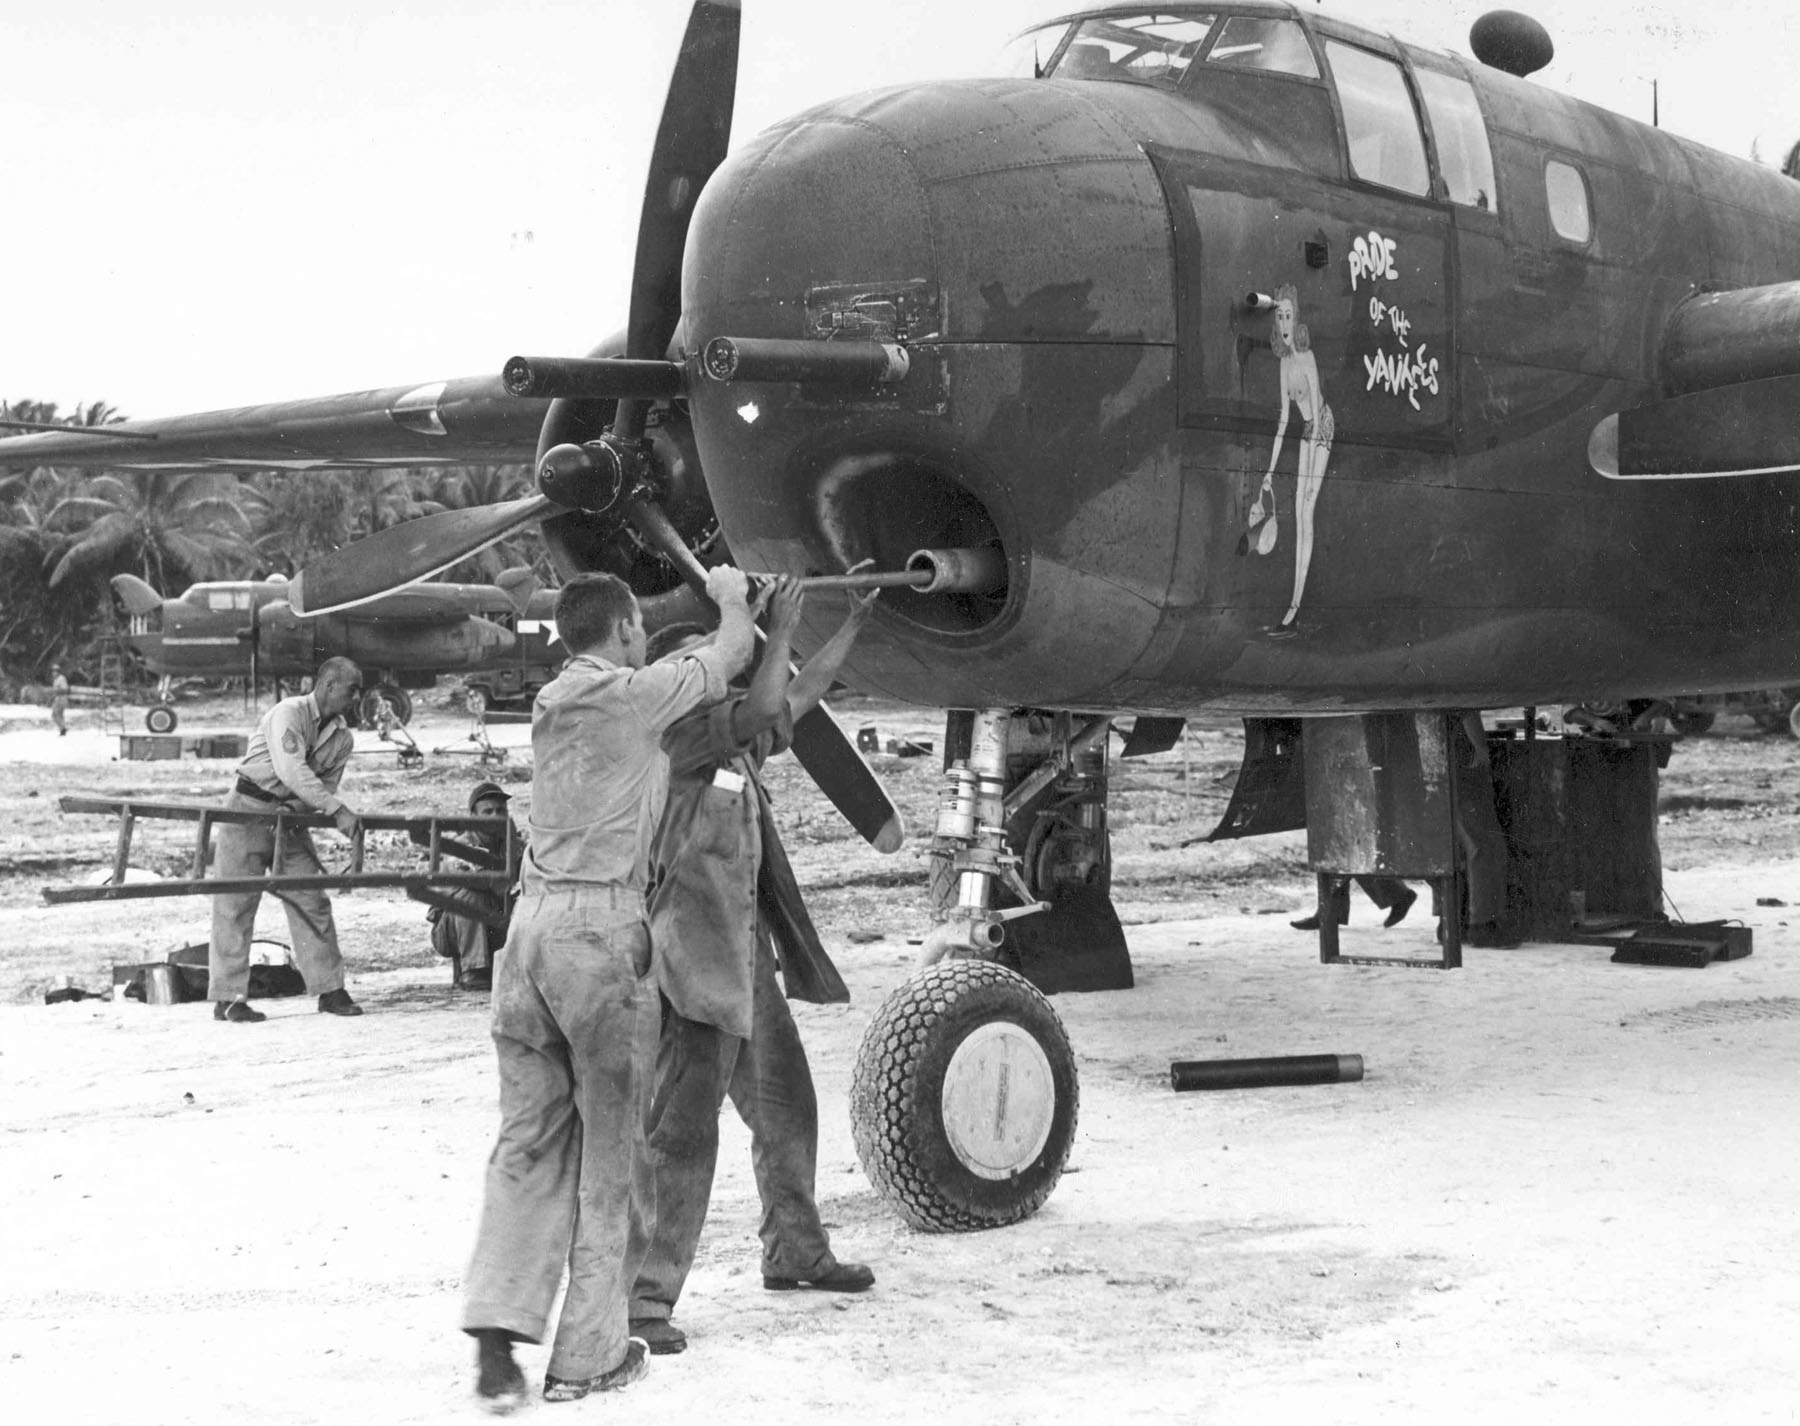 Armorer cleaning the bore of a 75mm cannon mounted in a B-25G Mitchell bomber of the 820th Bomb Squadron, Tarawa, Gilbert Islands; Mar-Apr 1944